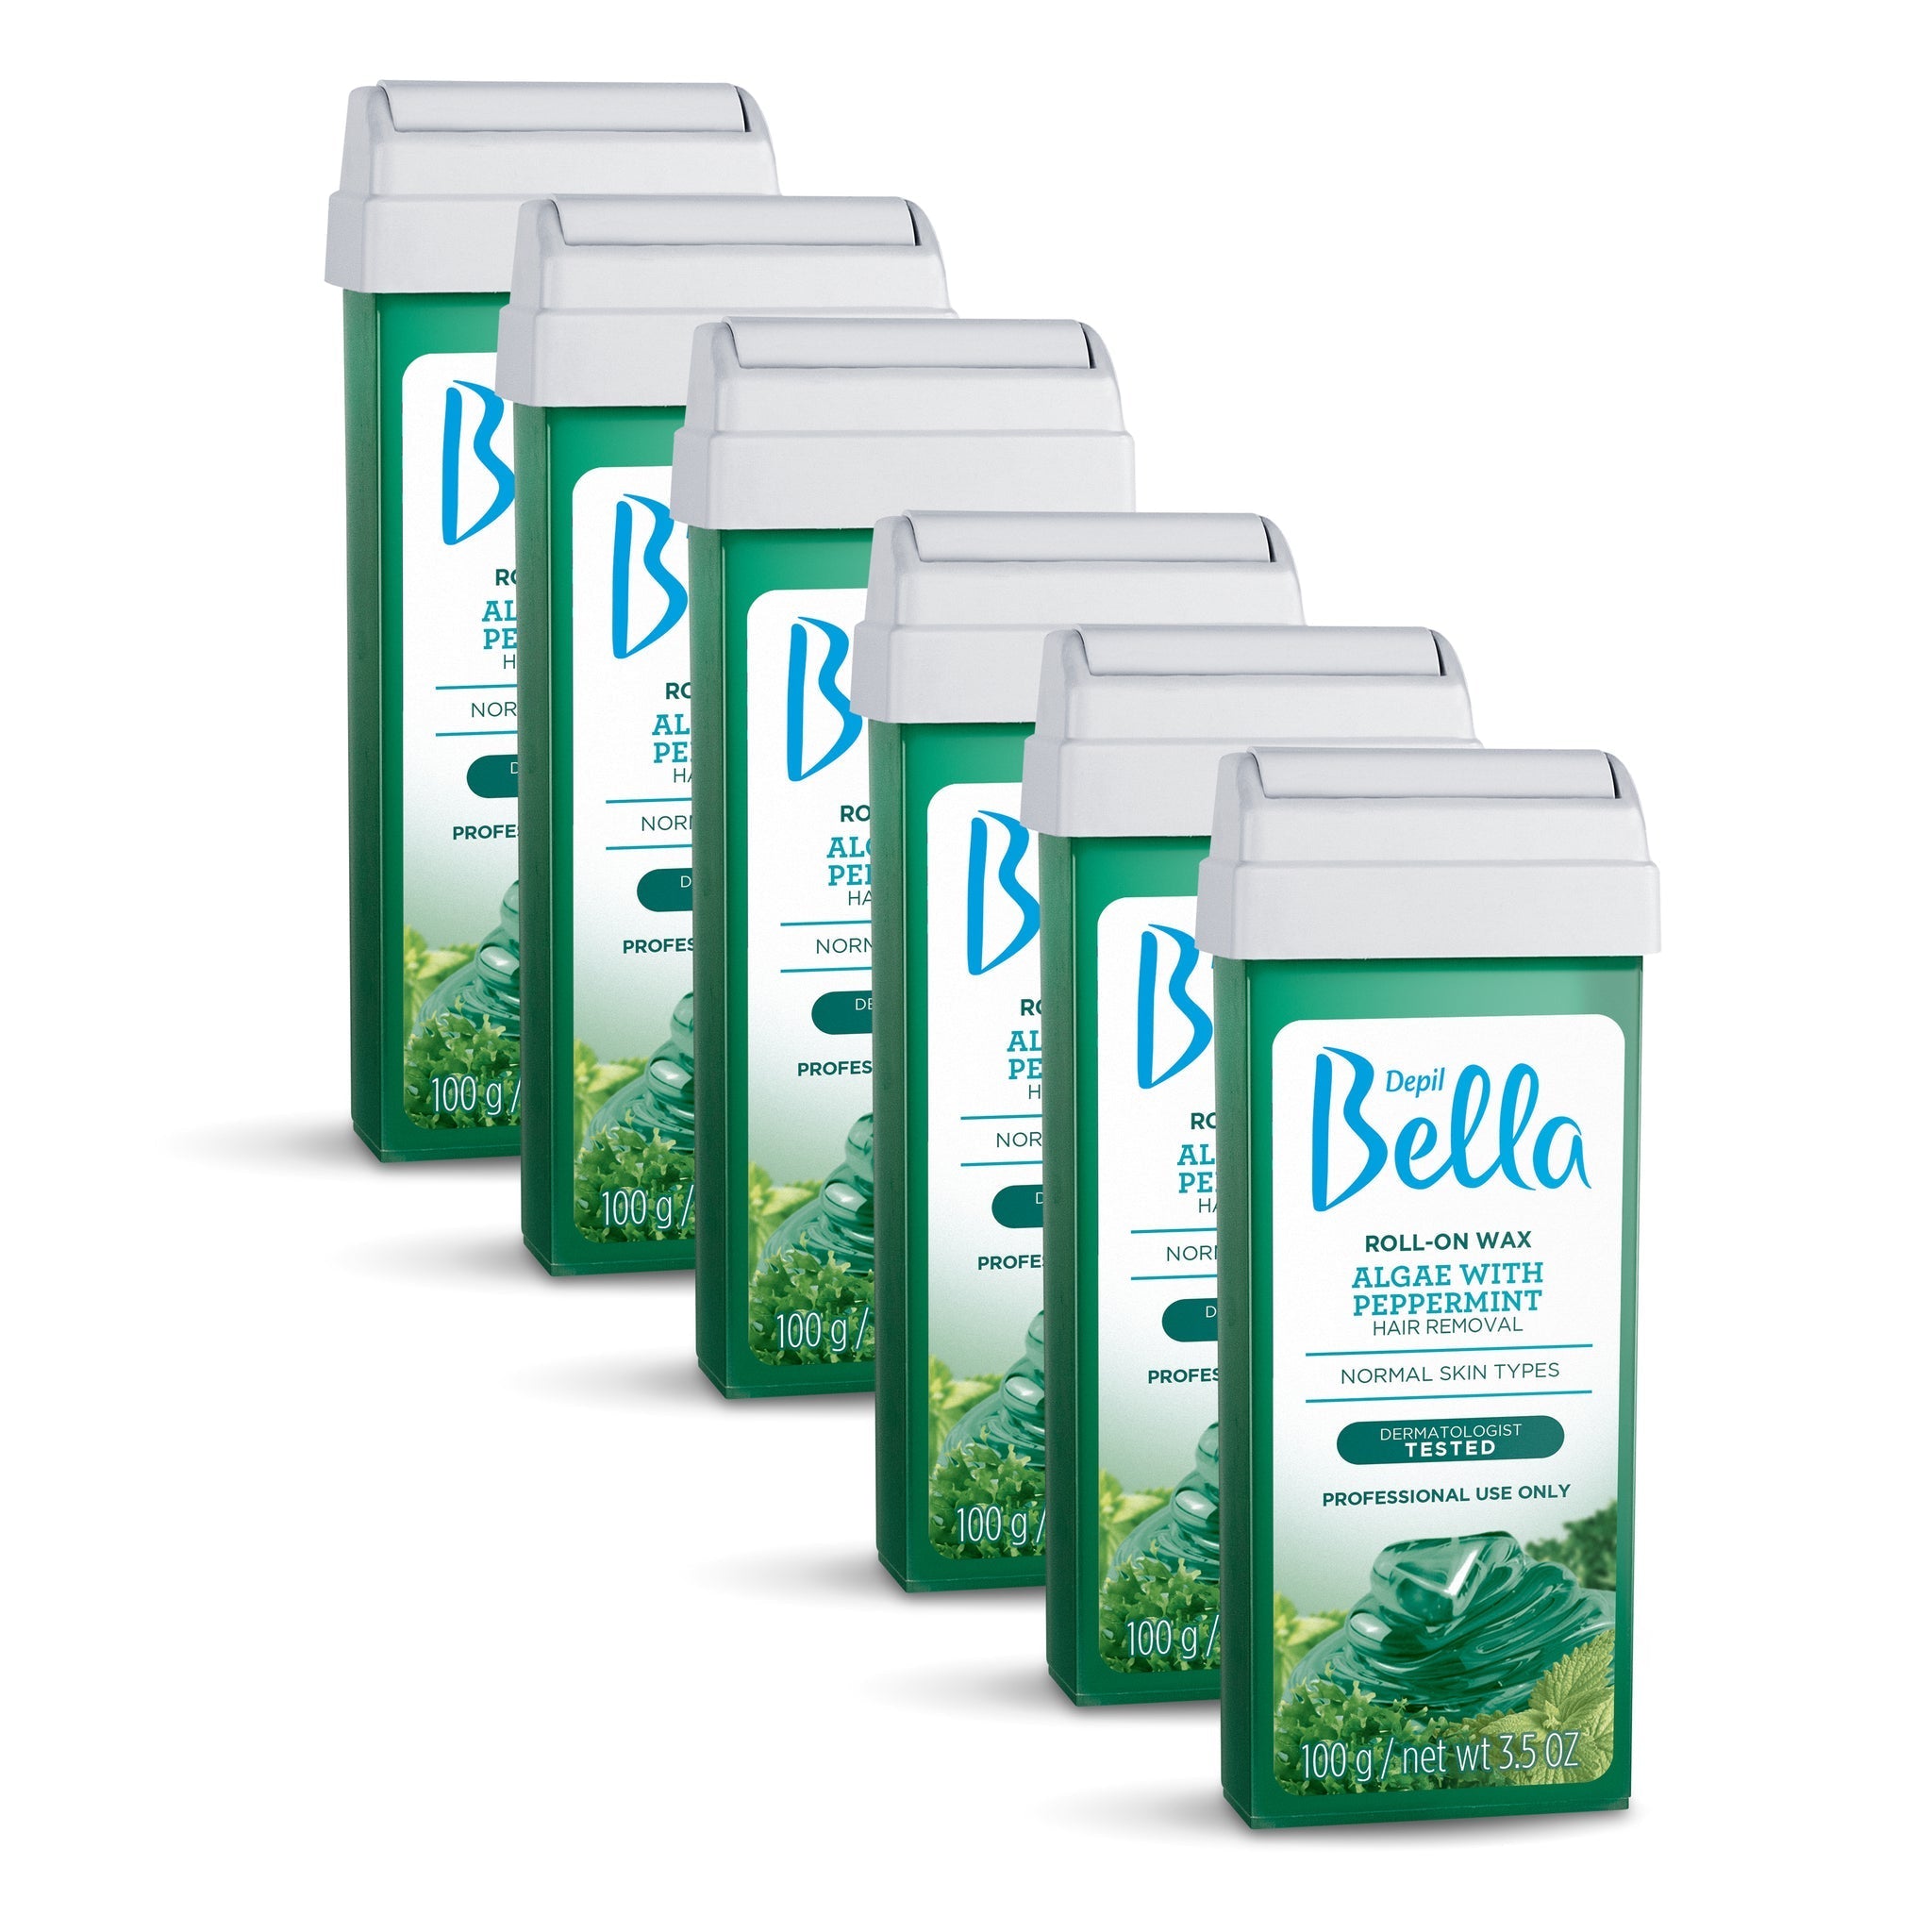 Depil Bella Hair Removal Wax Depil Bella Roll-On Algae with Peppermint Wax Hair Removal Cartridges 3.52Oz (6 Units )